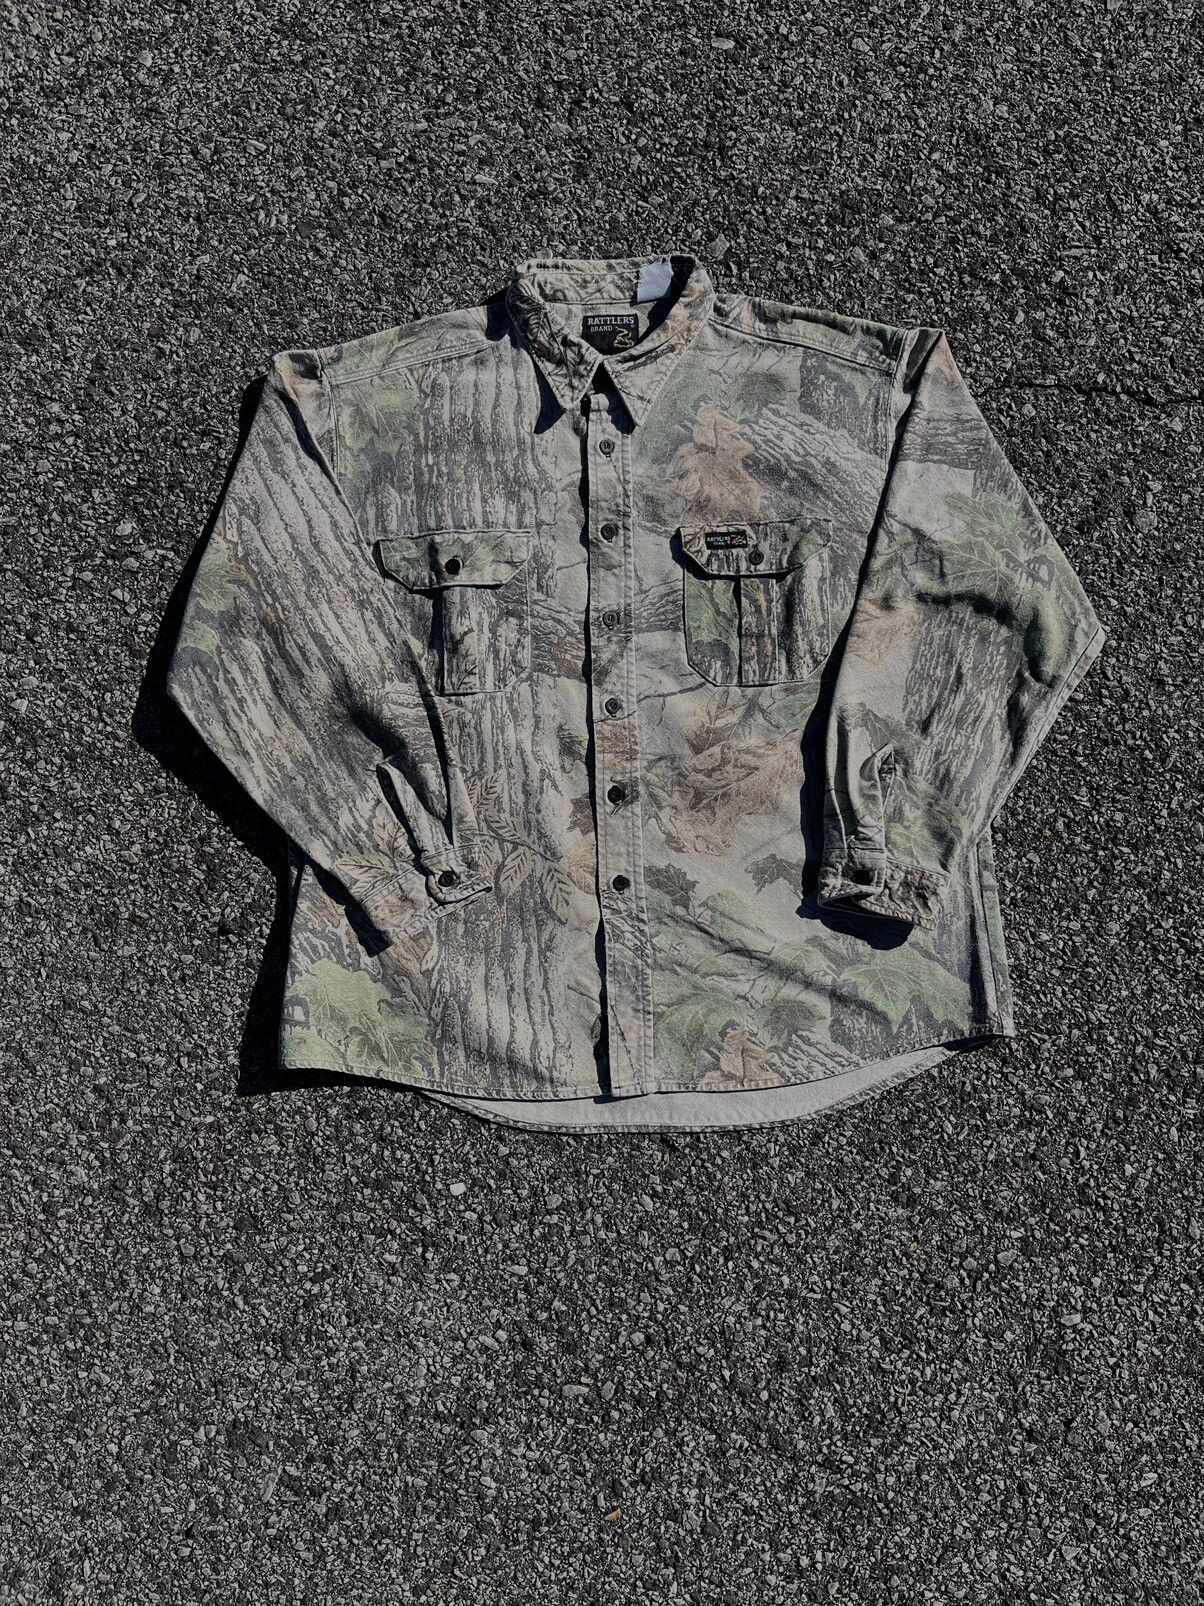 Vintage Vintage 90s Rattlers Brand Realtree Camo Button Up